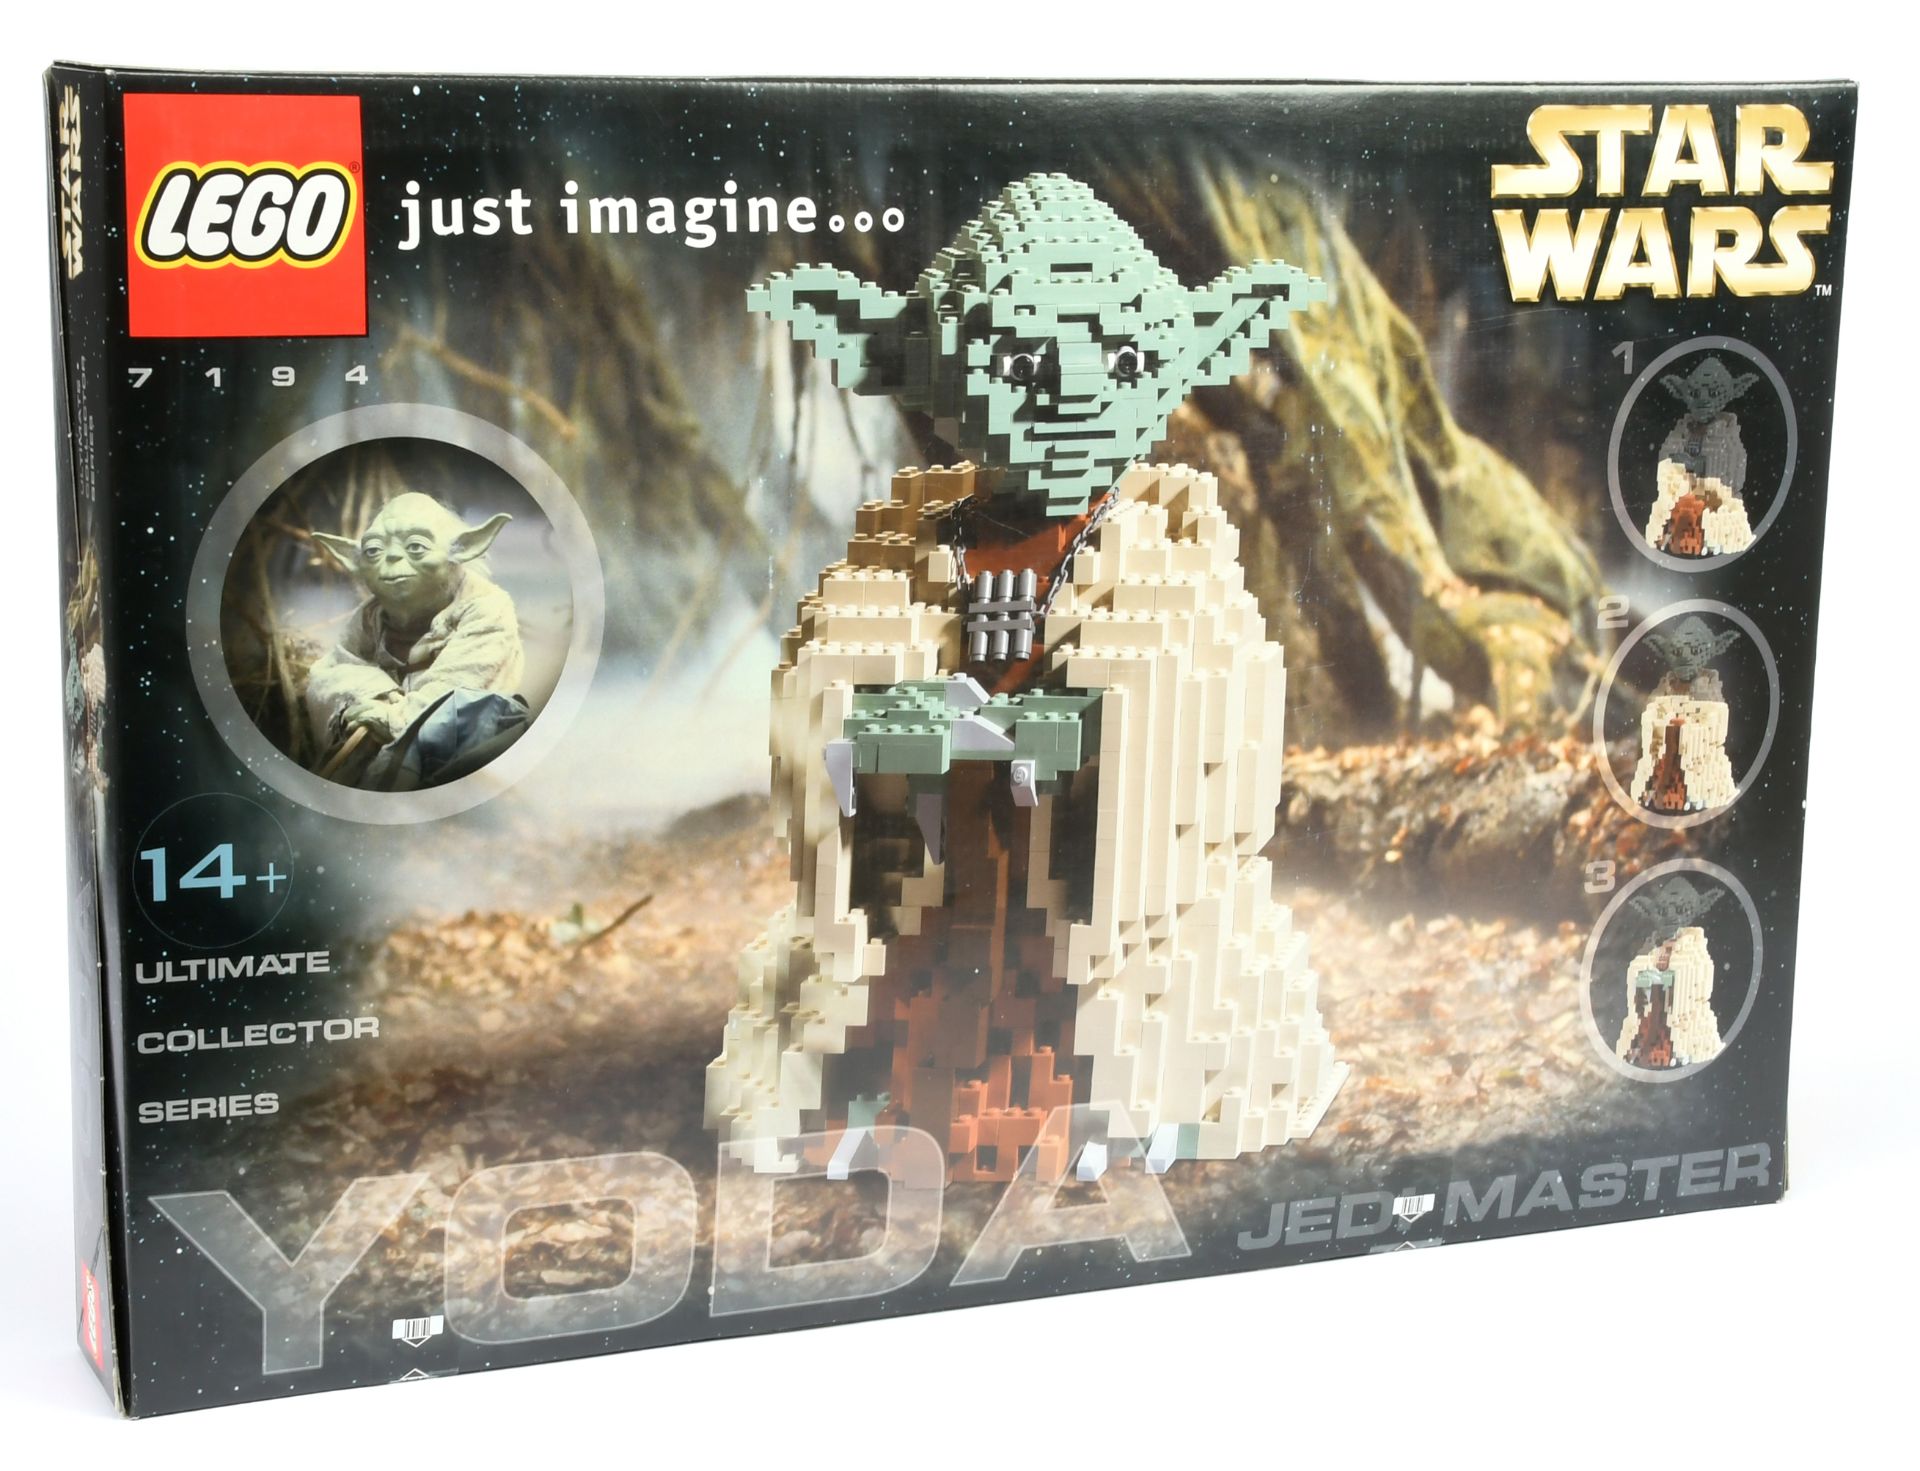 Lego Star Wars 7194 Yoda Ultimate Collector Series - 2002, within Near Mint sealed packaging. - Bild 2 aus 2